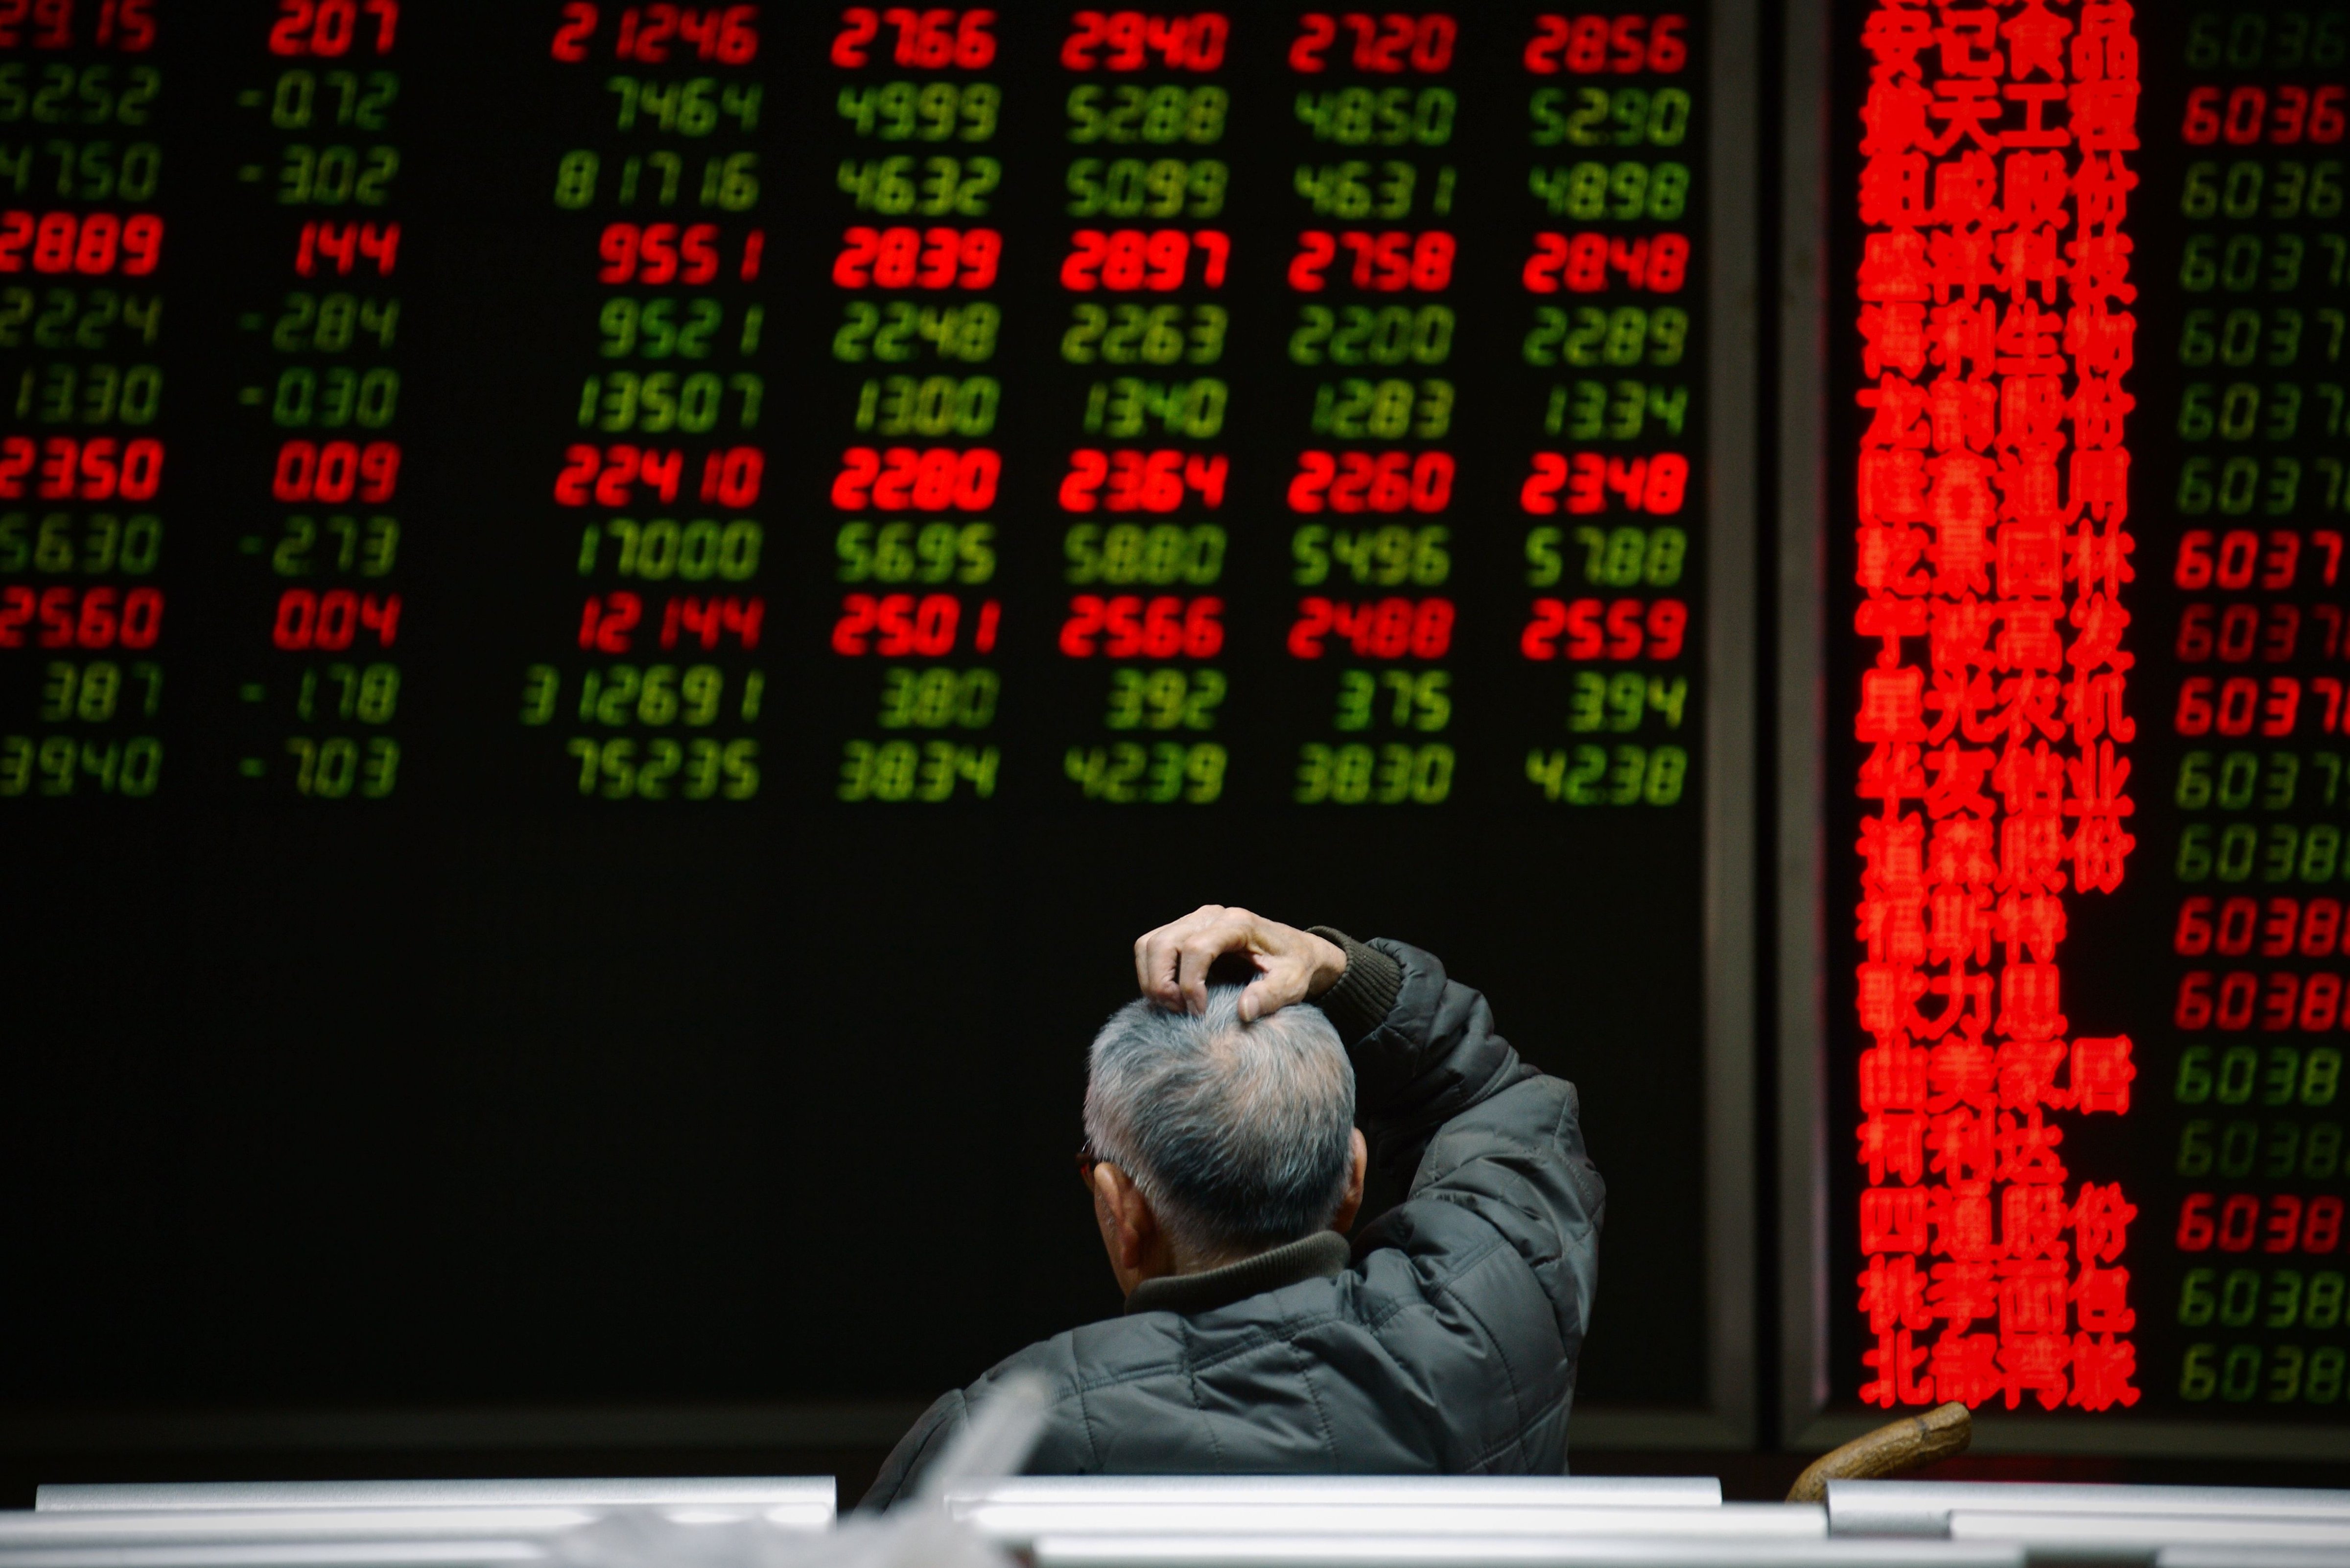 An investor looks at screens showing stock market movements at a securities company in Beijing on Jan. 14, 2016.